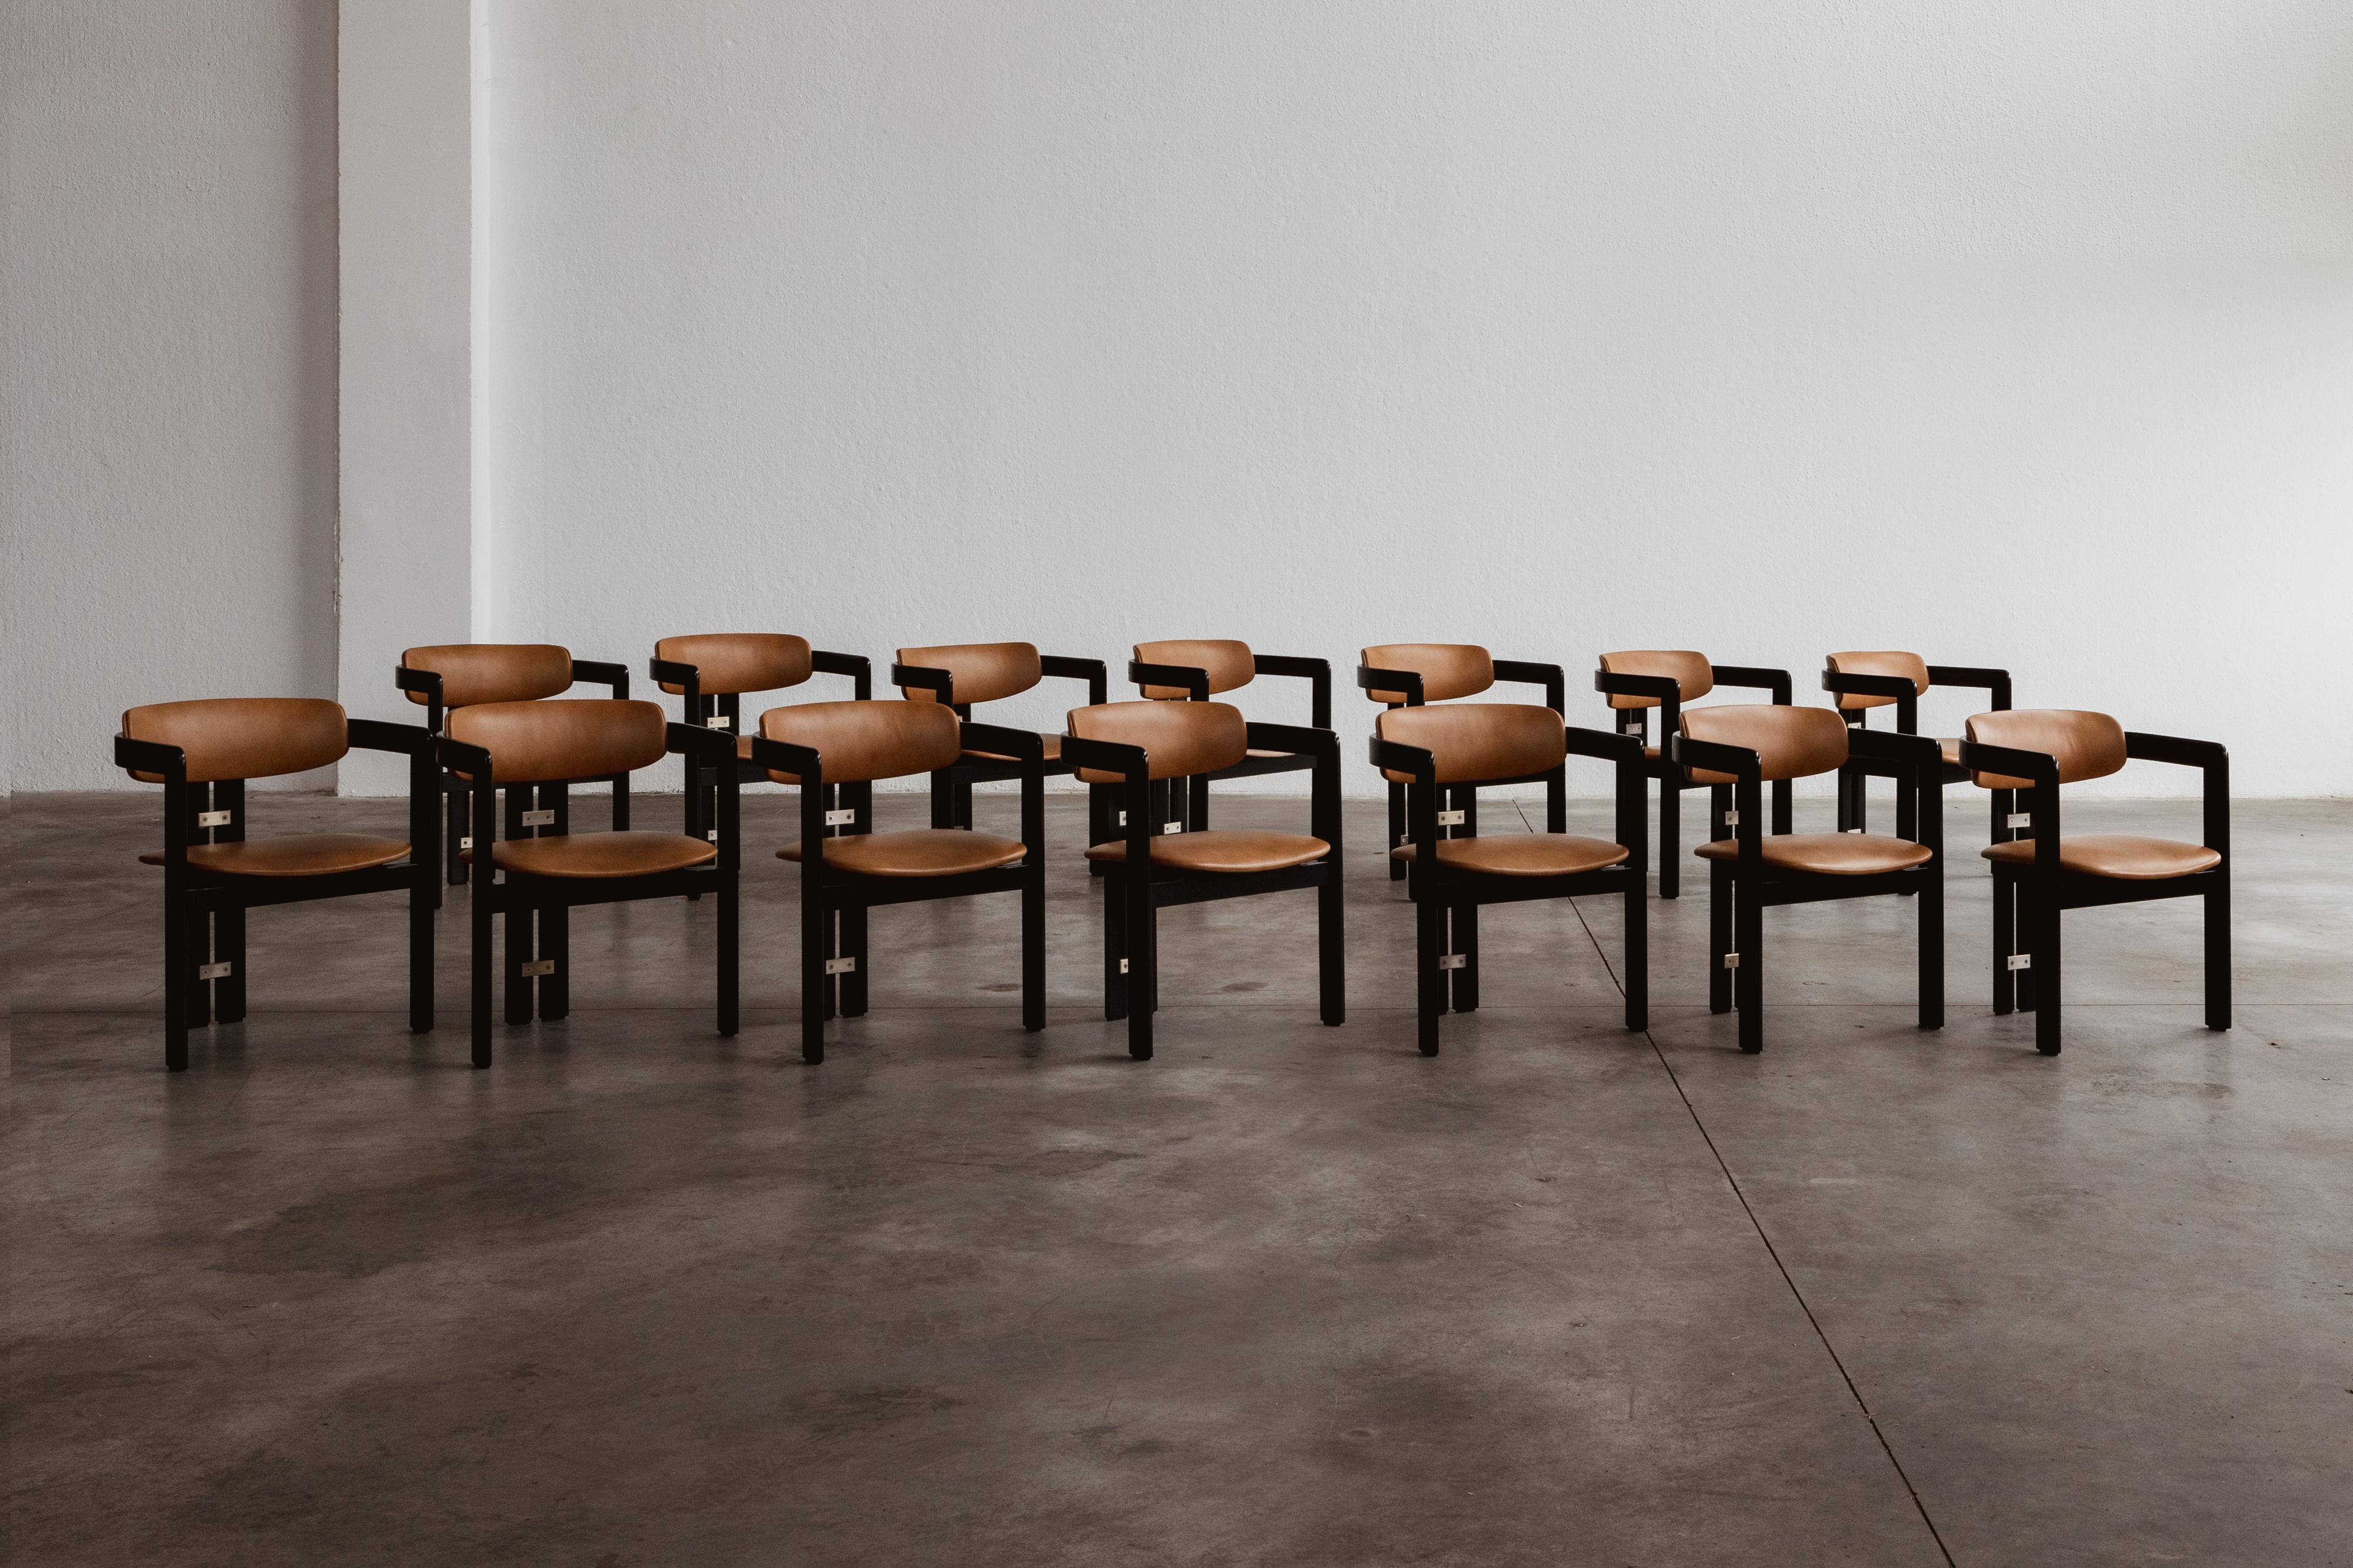 Augusto Savini “Pamplona” dining chairs for Pozzi, black framework and ranch leather, Italy, 1965, set of fourteen.

In the realm of Italian craftsmanship, the Pamplona chairs by Augusto Savini for Pozzi stand as a symbol of architectural elegance.